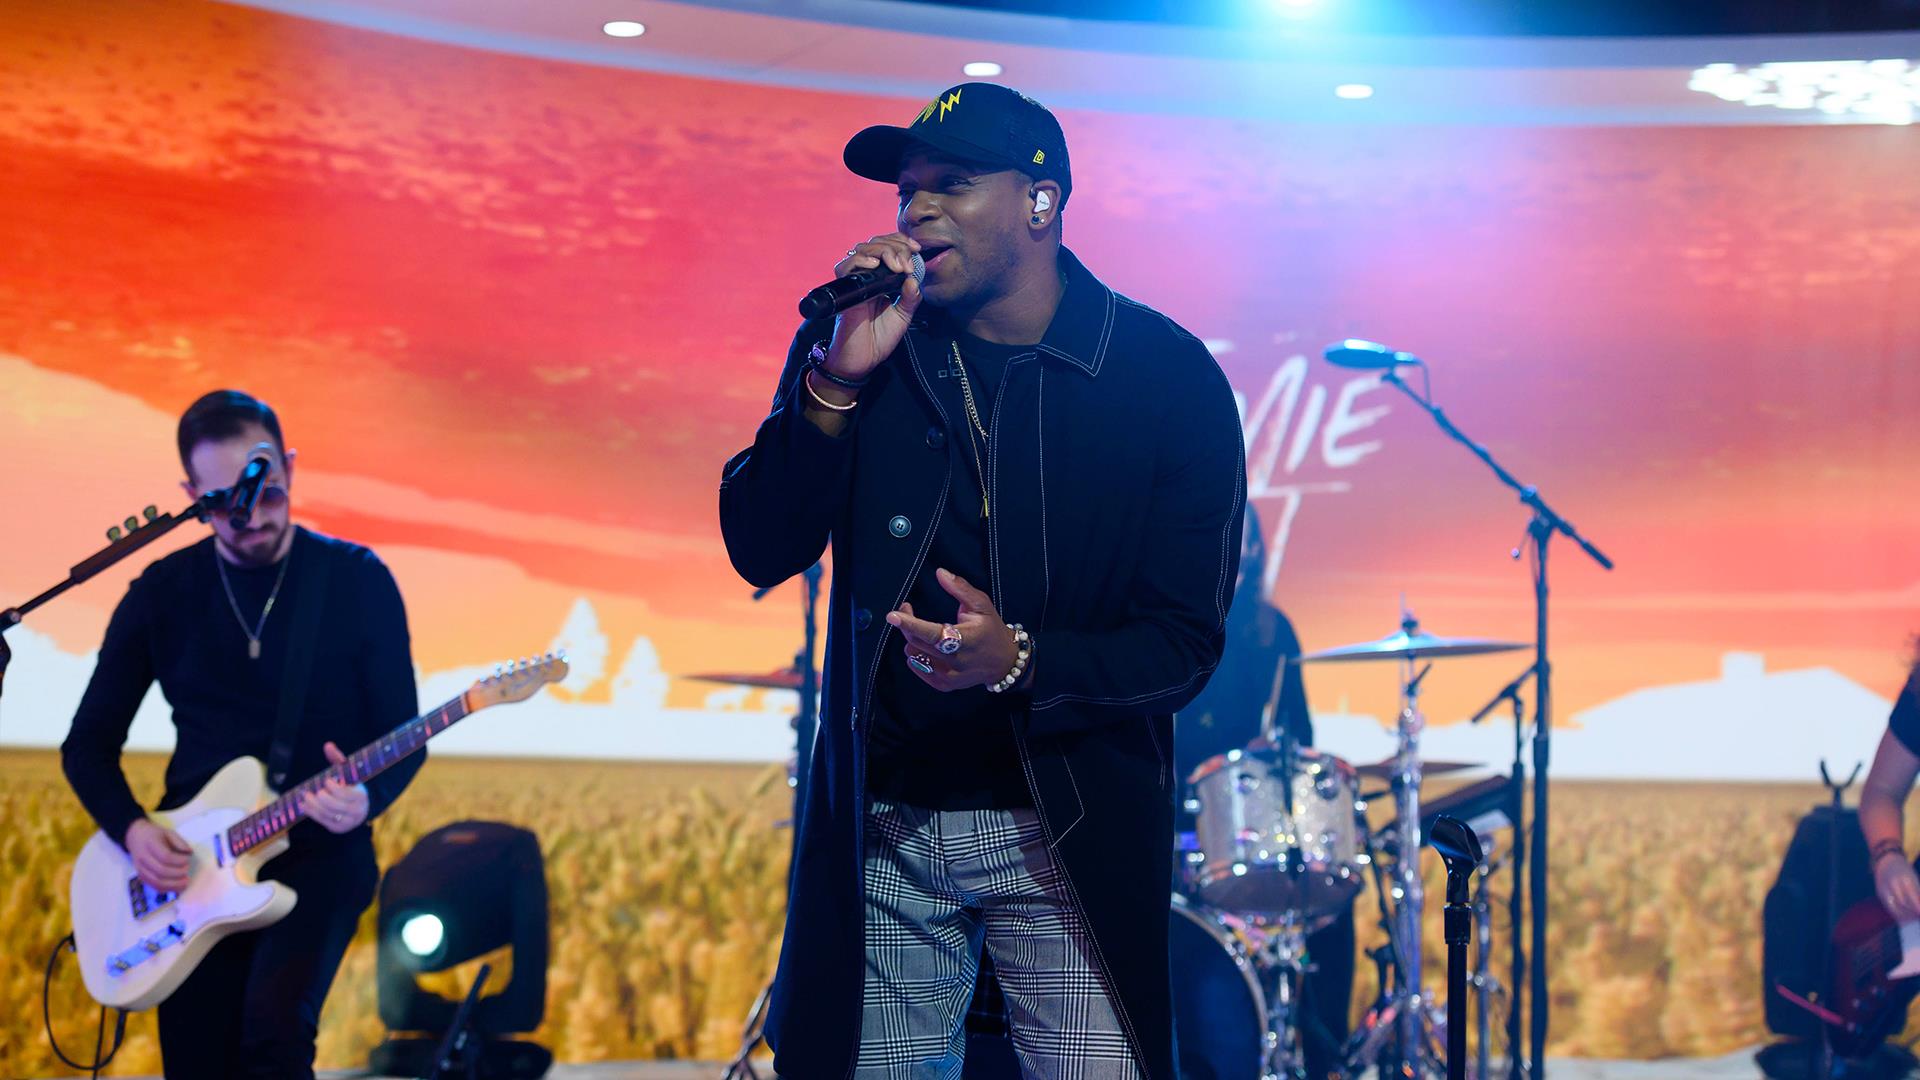 Flipboard: See Jimmie Allen perform 'Make Me Want To' on TODAY